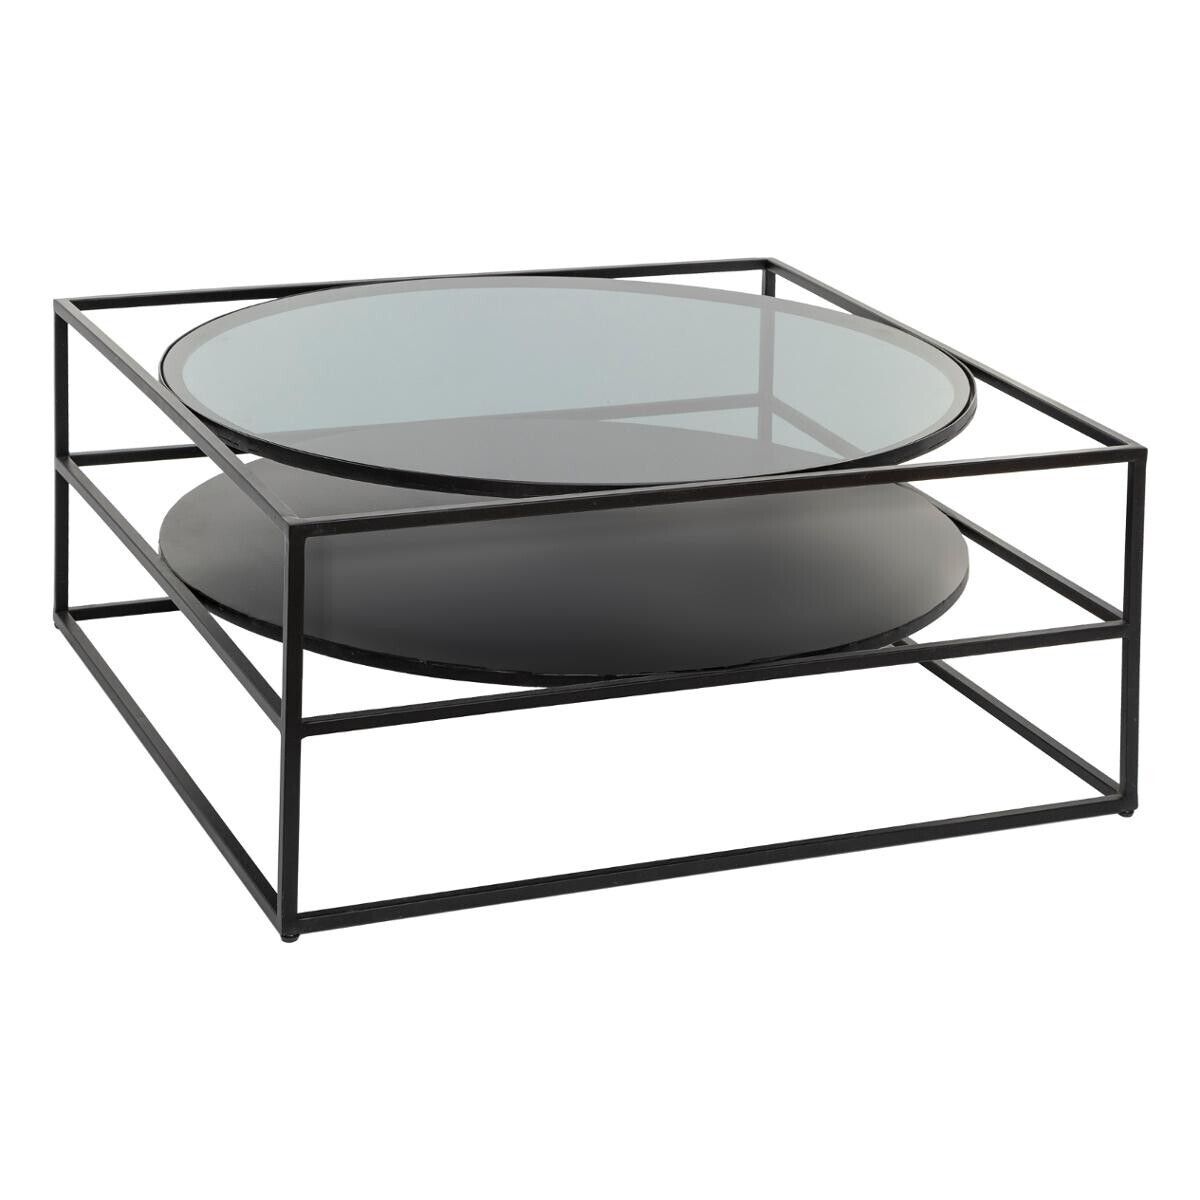 Yoho Coffee Table With Tempered Glass Top 90 X 90 Cm – Atmosphera Official  Website With Regard To Tempered Glass Coffee Tables (View 3 of 20)